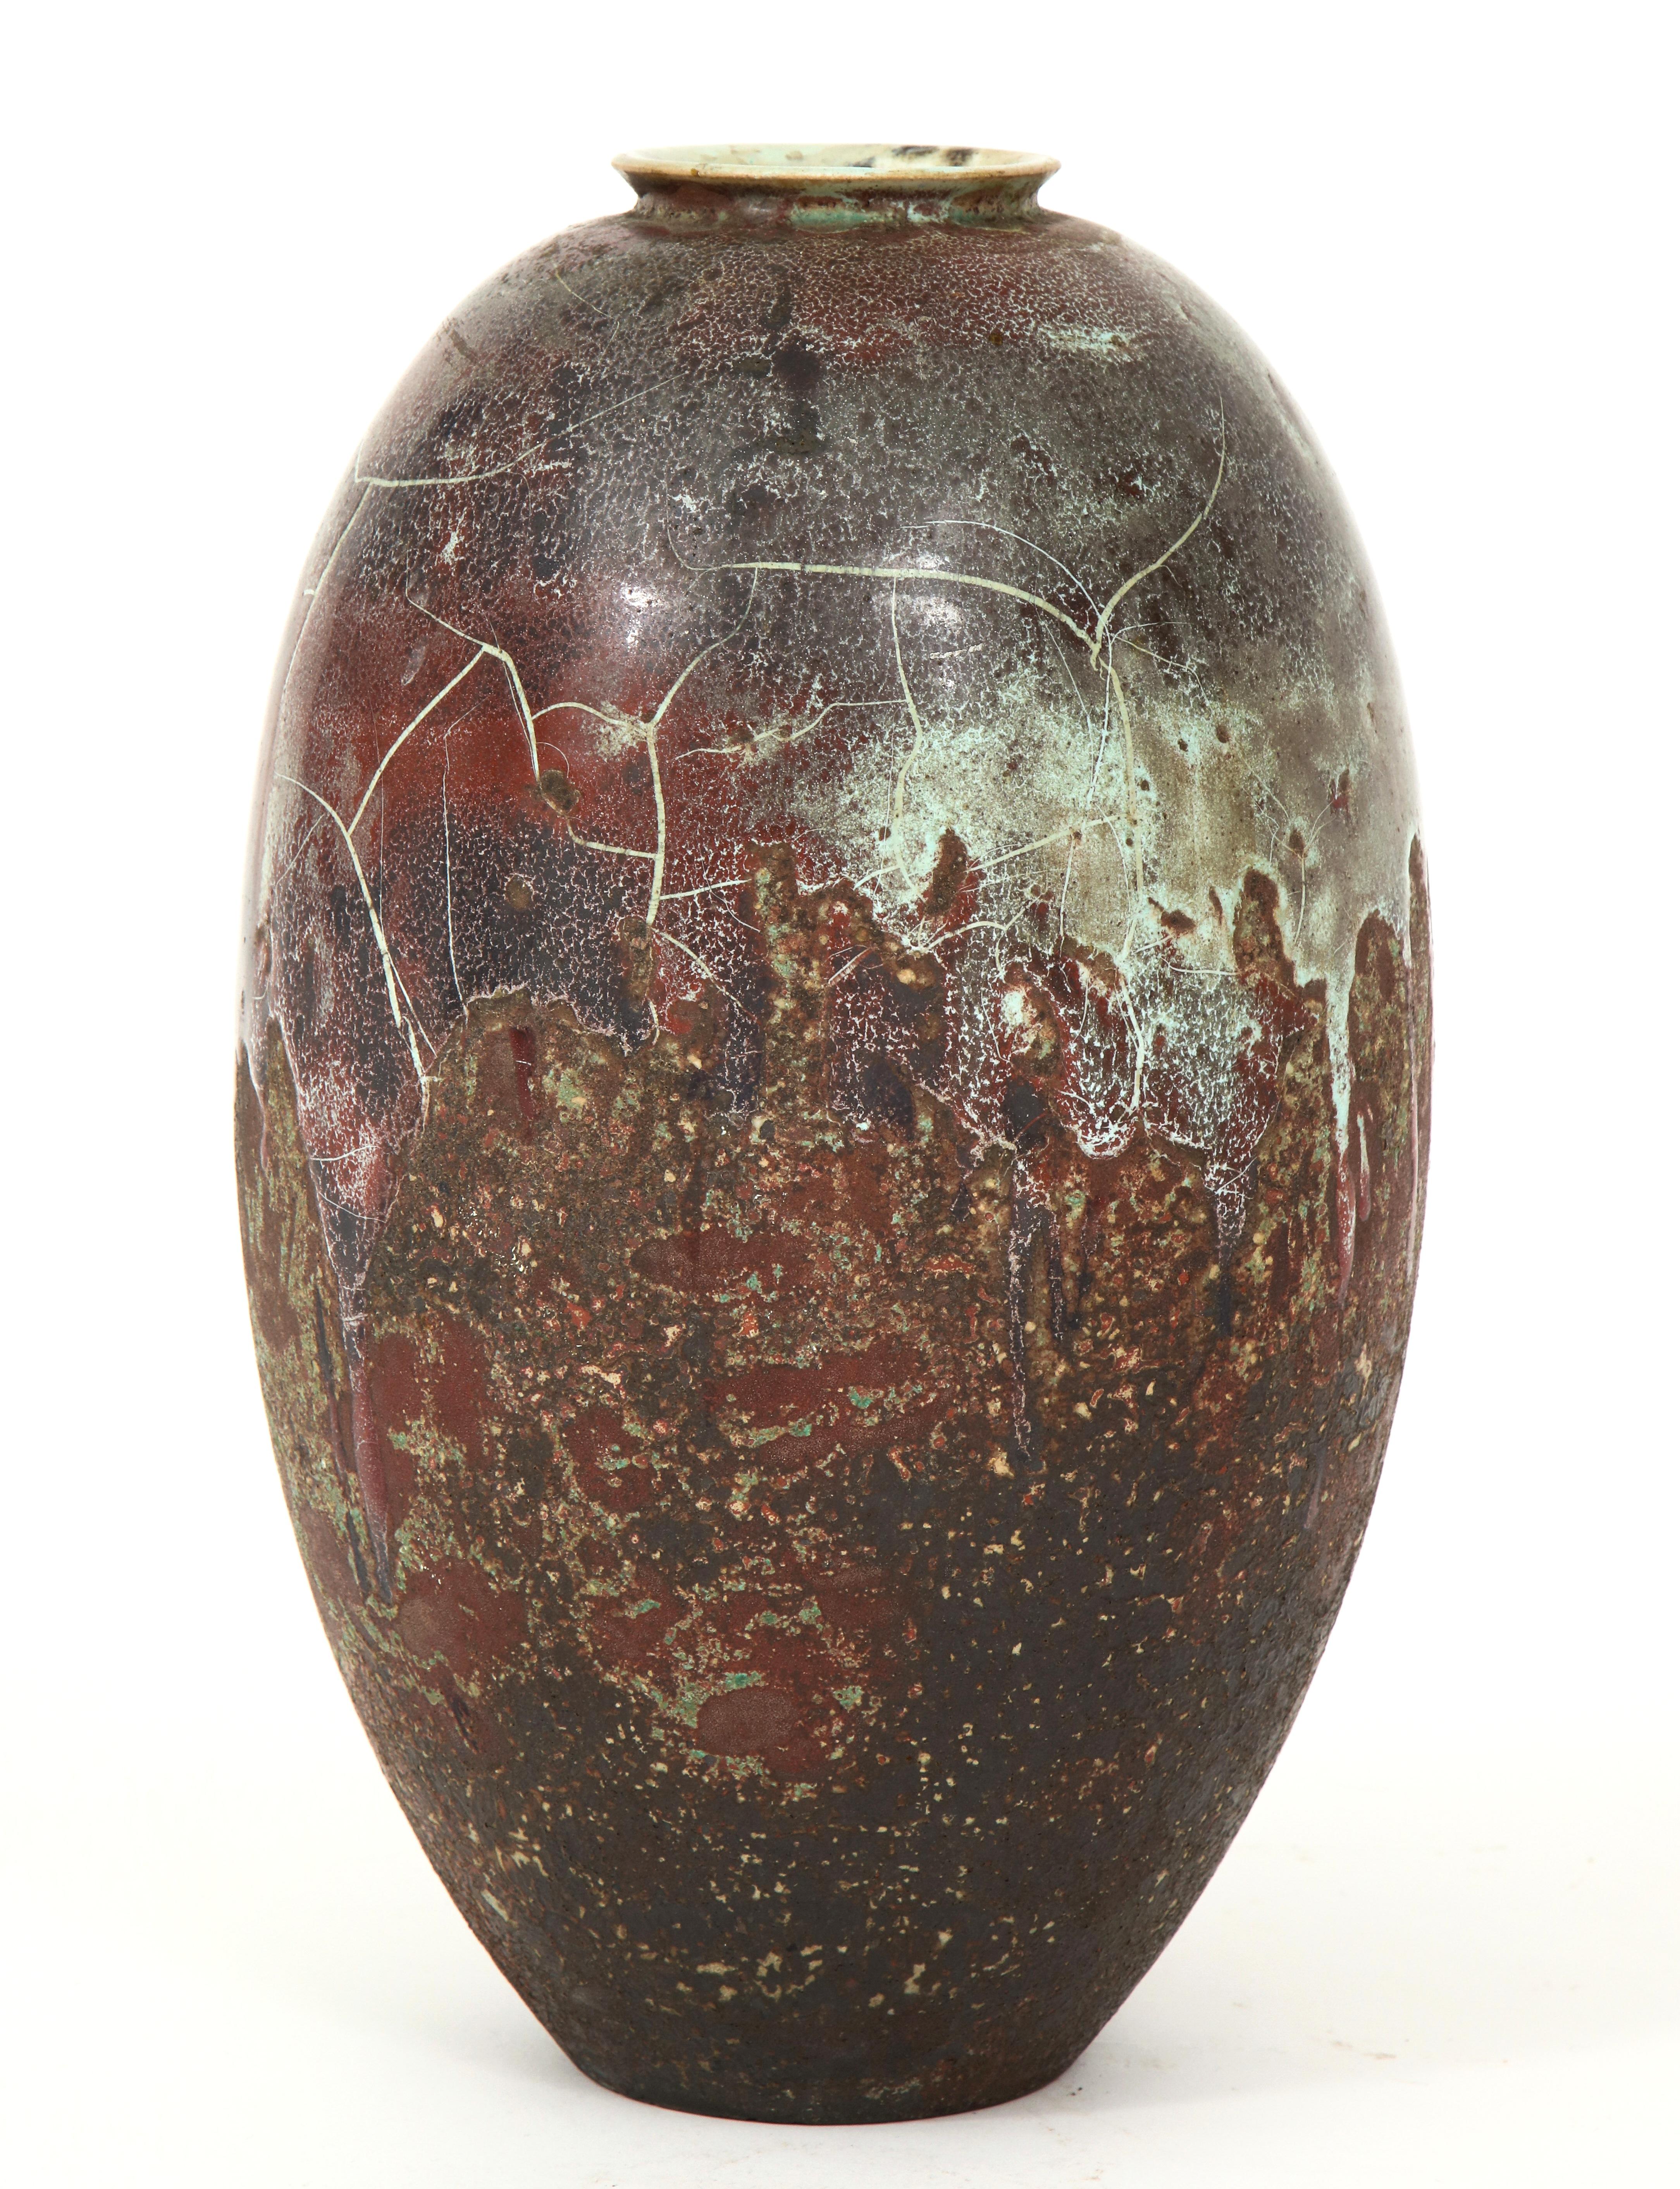 Rare and early handmade Dutch ceramic ovoid vase by Mobach circa late 1931. Incredible gradations of speckled color from a soft light green glaze, to various shades of maroons which is called a Bouke Mobach. It's a glaze with iron oxides in a